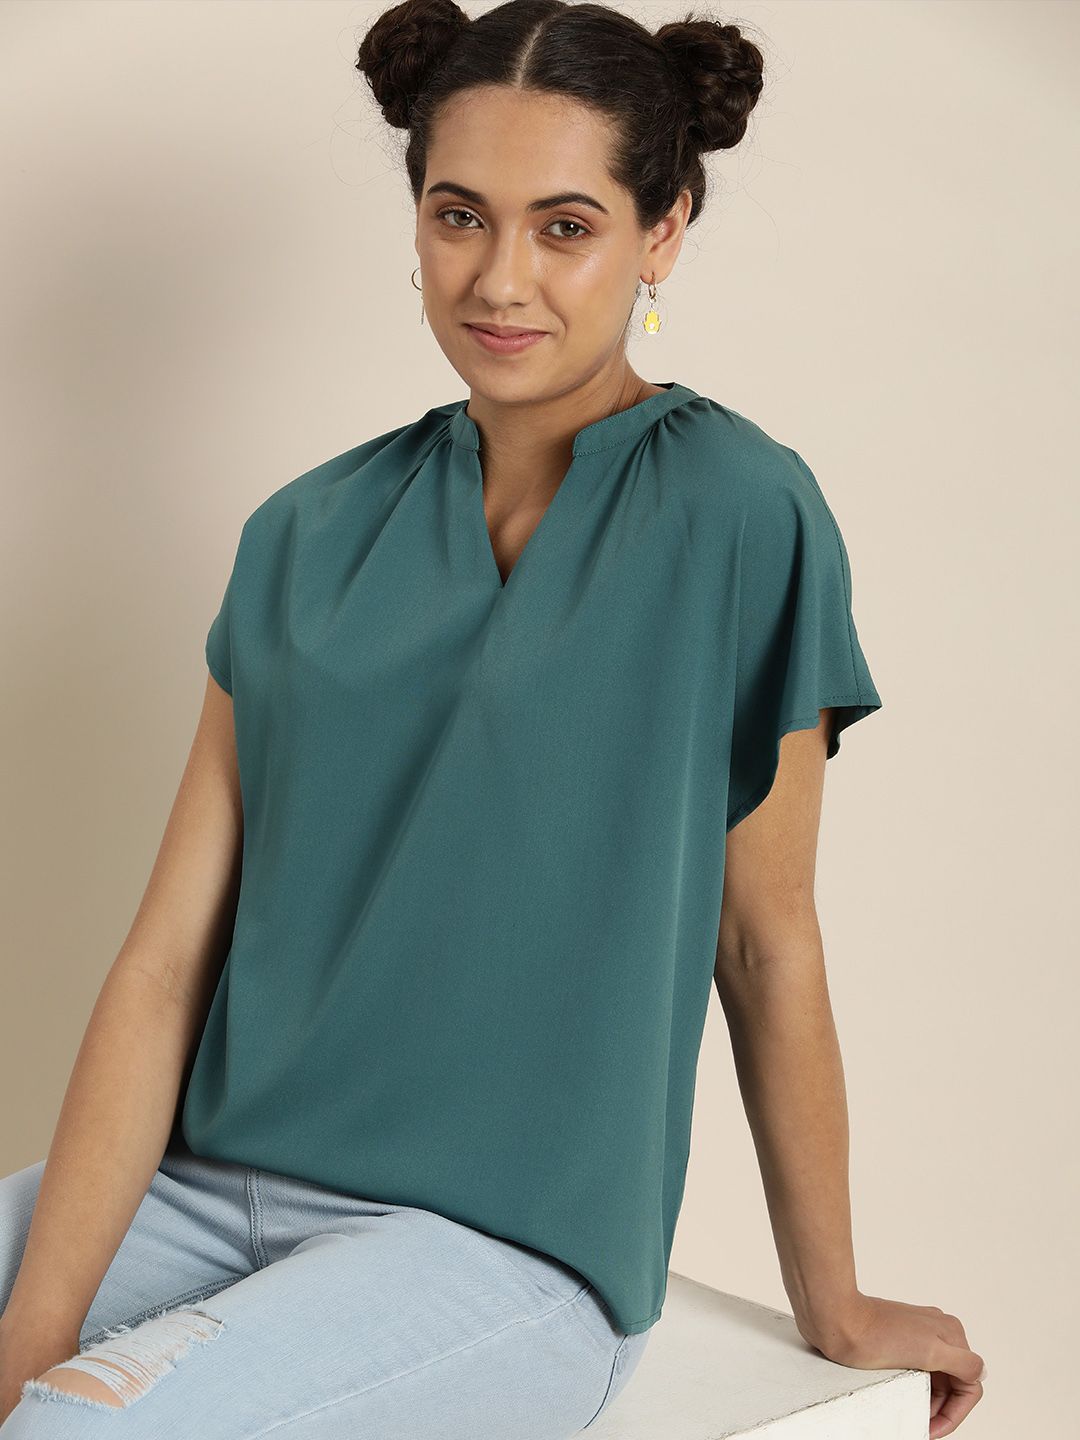 encore by INVICTUS Teal Blue Solid Regular Top Price in India